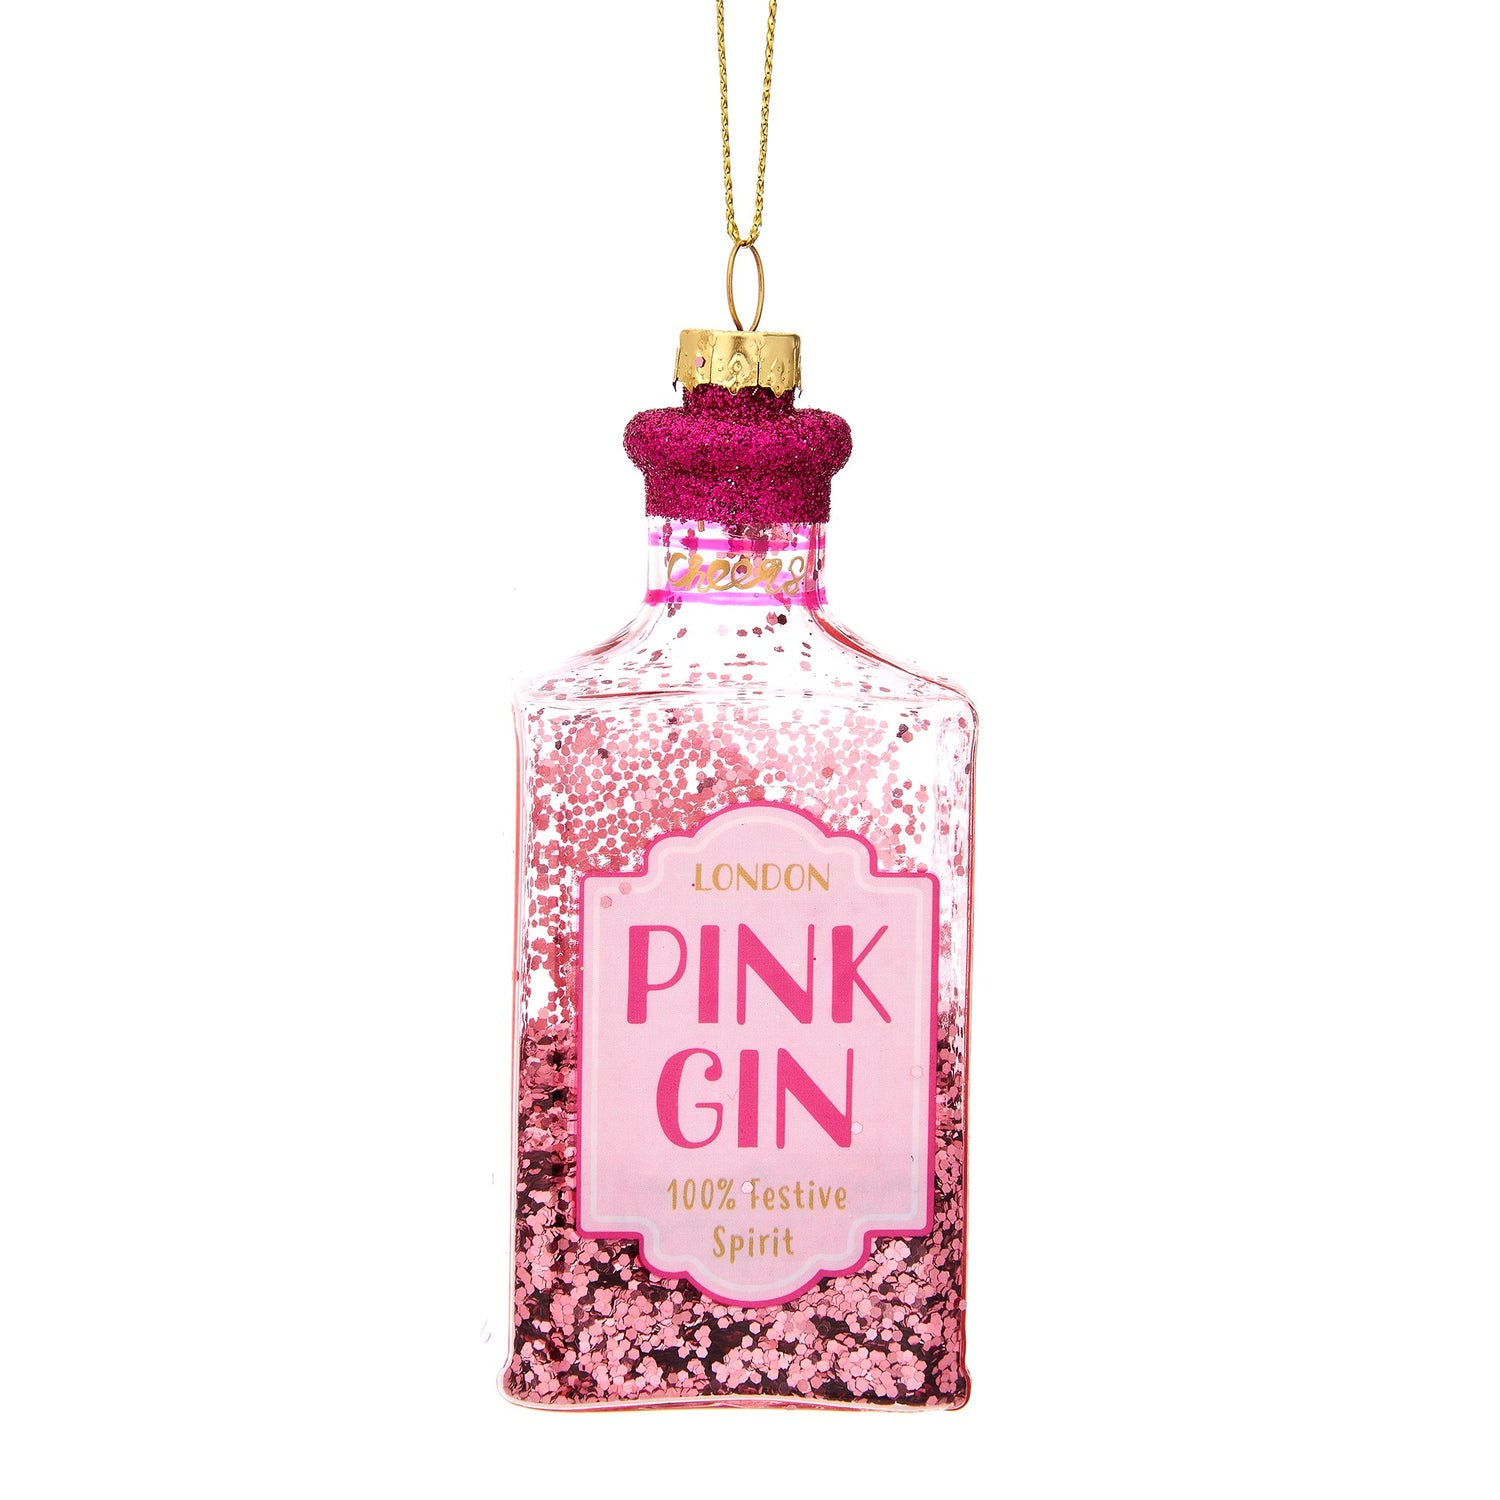 Pink Gin Bottle shaped Christmas tree hanging bauble